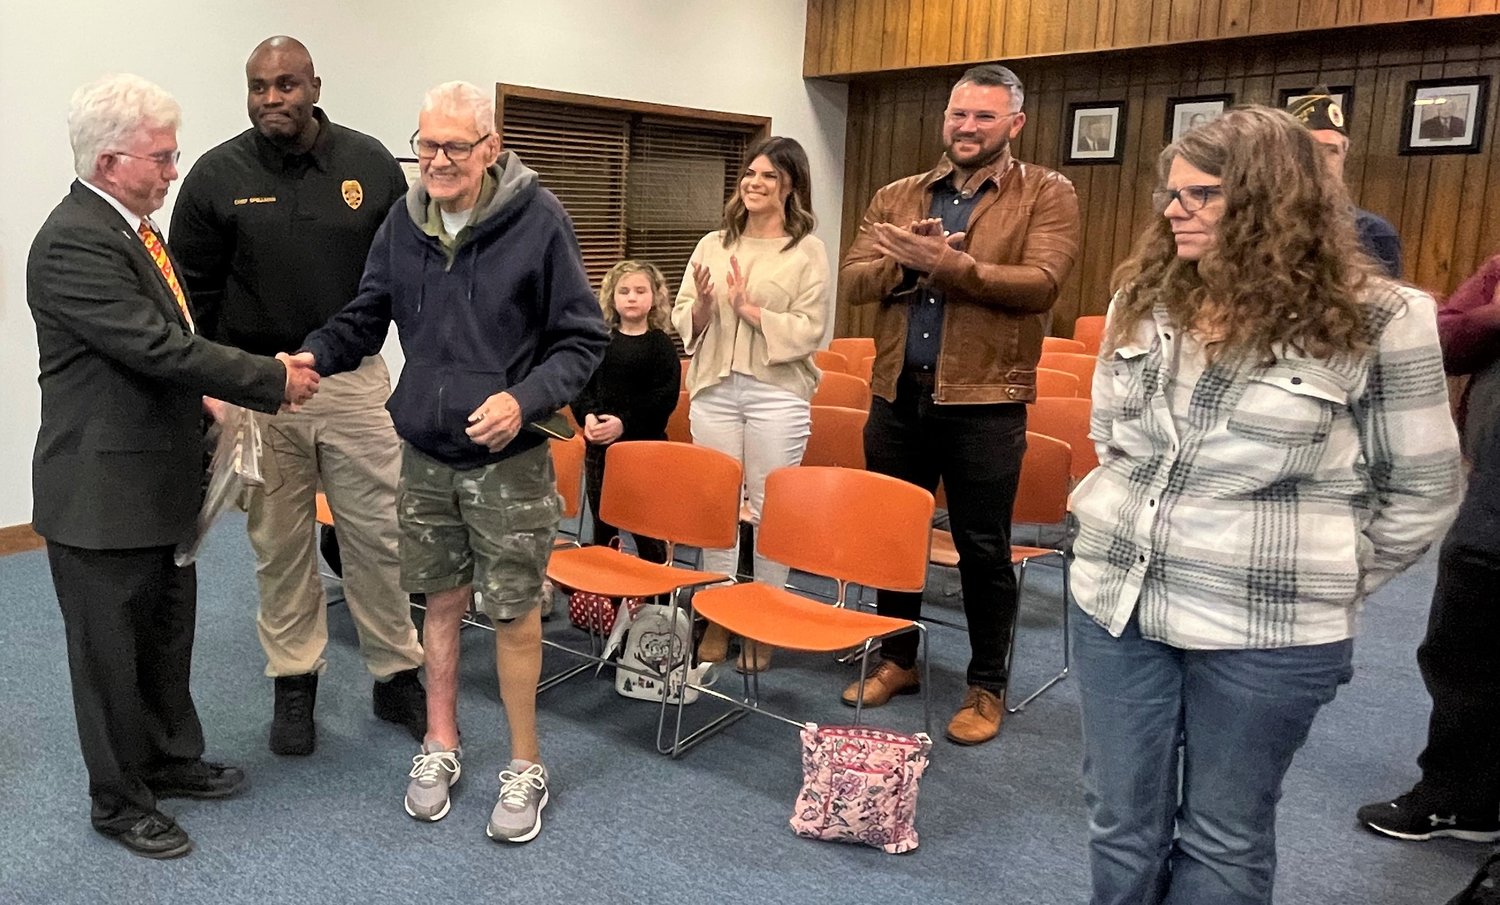 Retired Sgt. Maj. Charles L. Miller was presented with a plaque, town coin and handmade quilt during the Spring Lake Board of Aldermen meeting on Monday night.